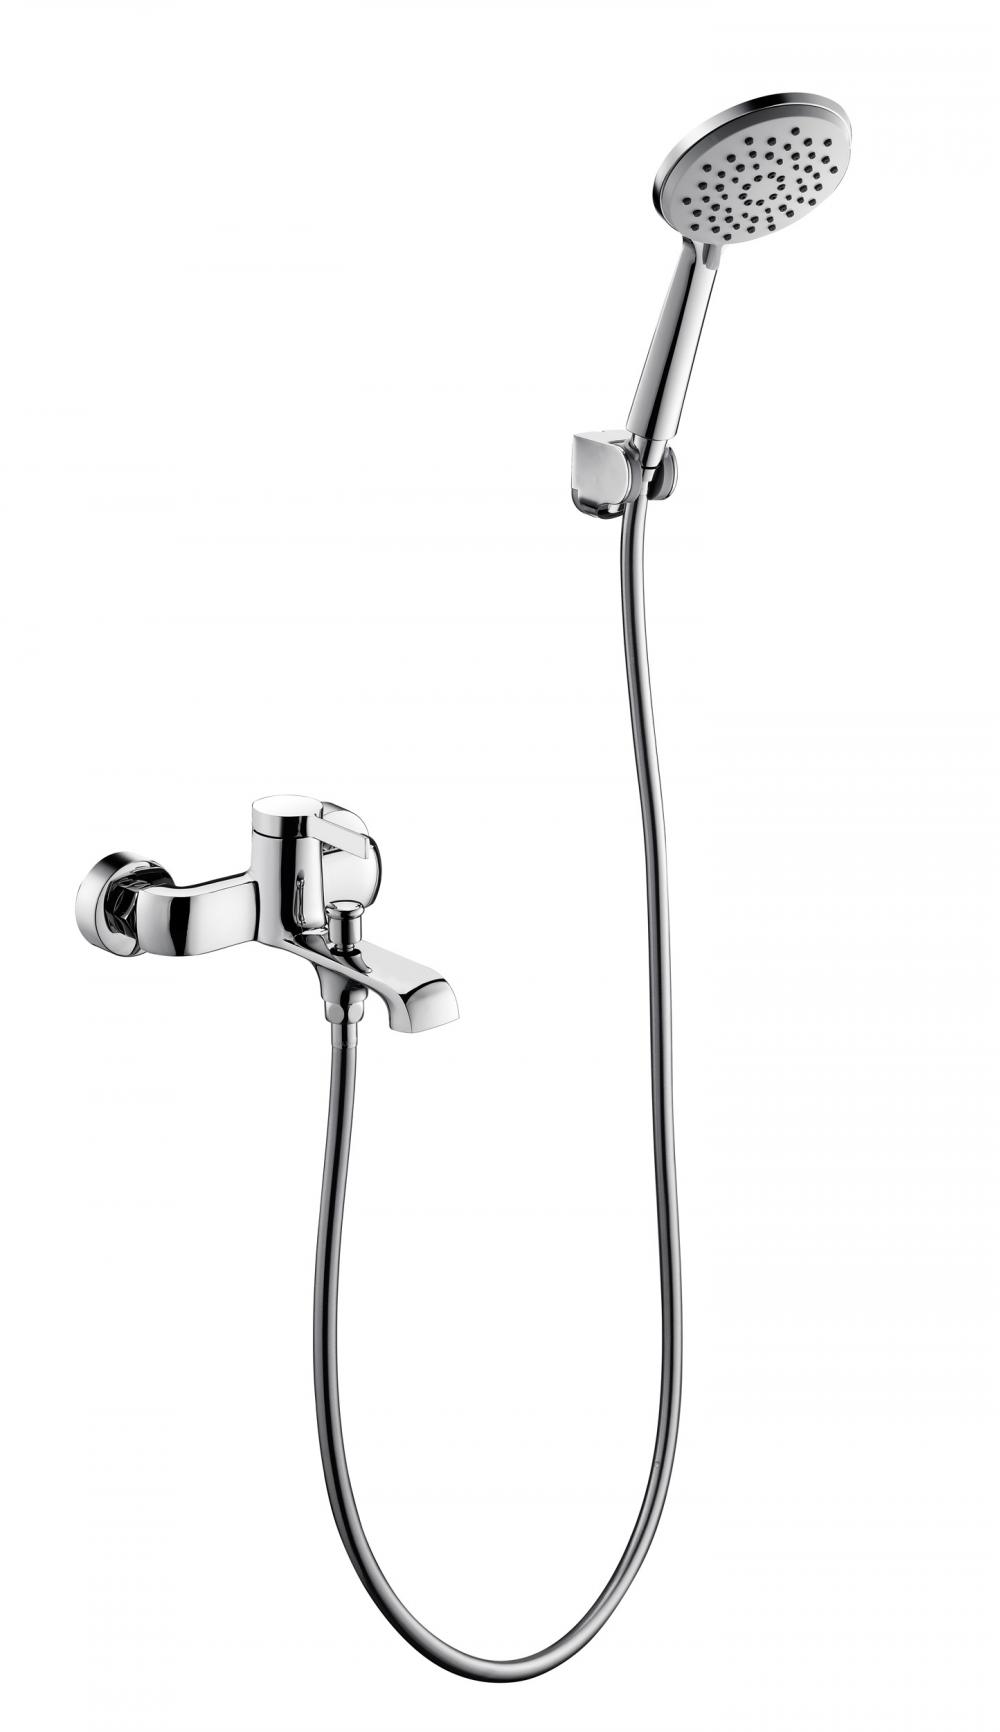 Modern Exposed Brass Single Handle Tub Shower Faucet